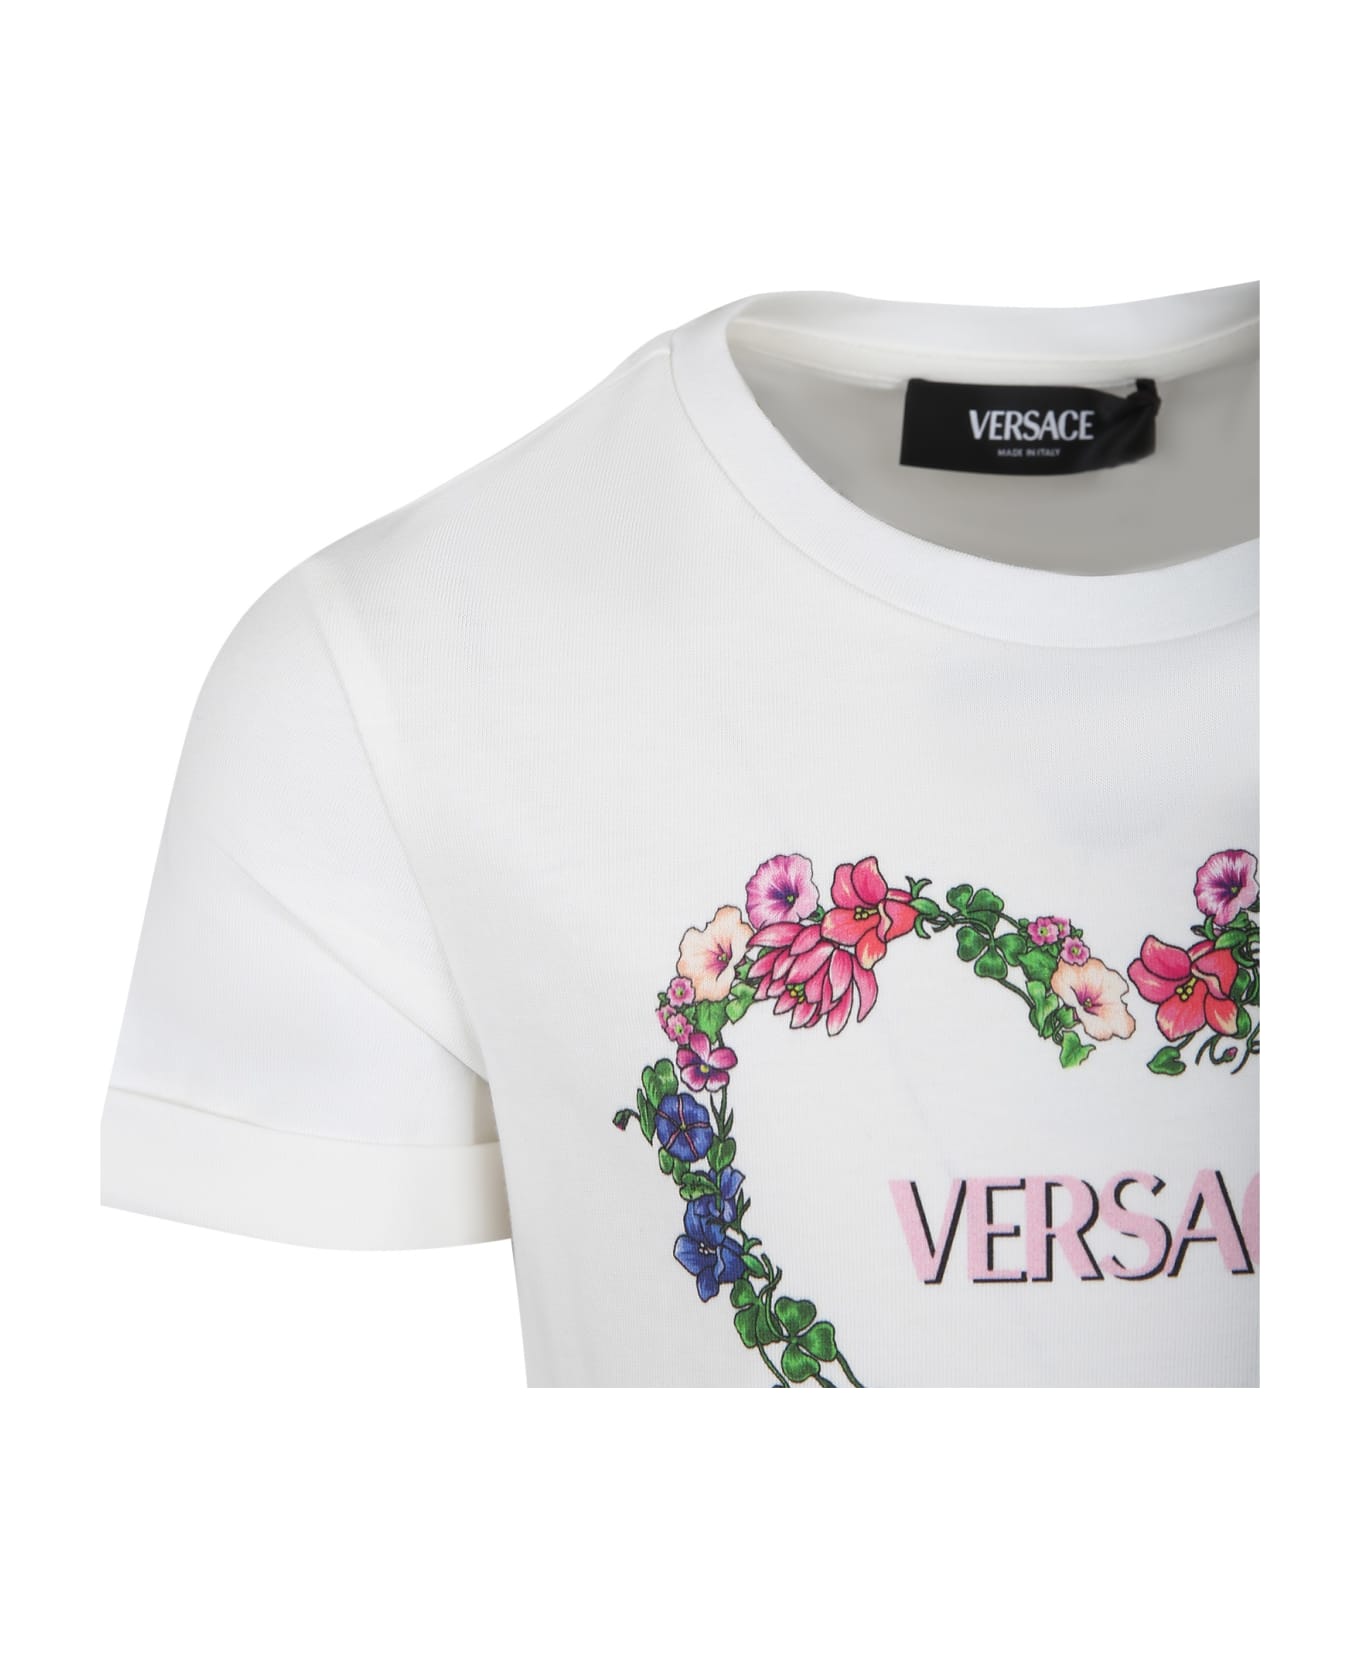 Versace White Dress For Girl With Multicolor Print - White